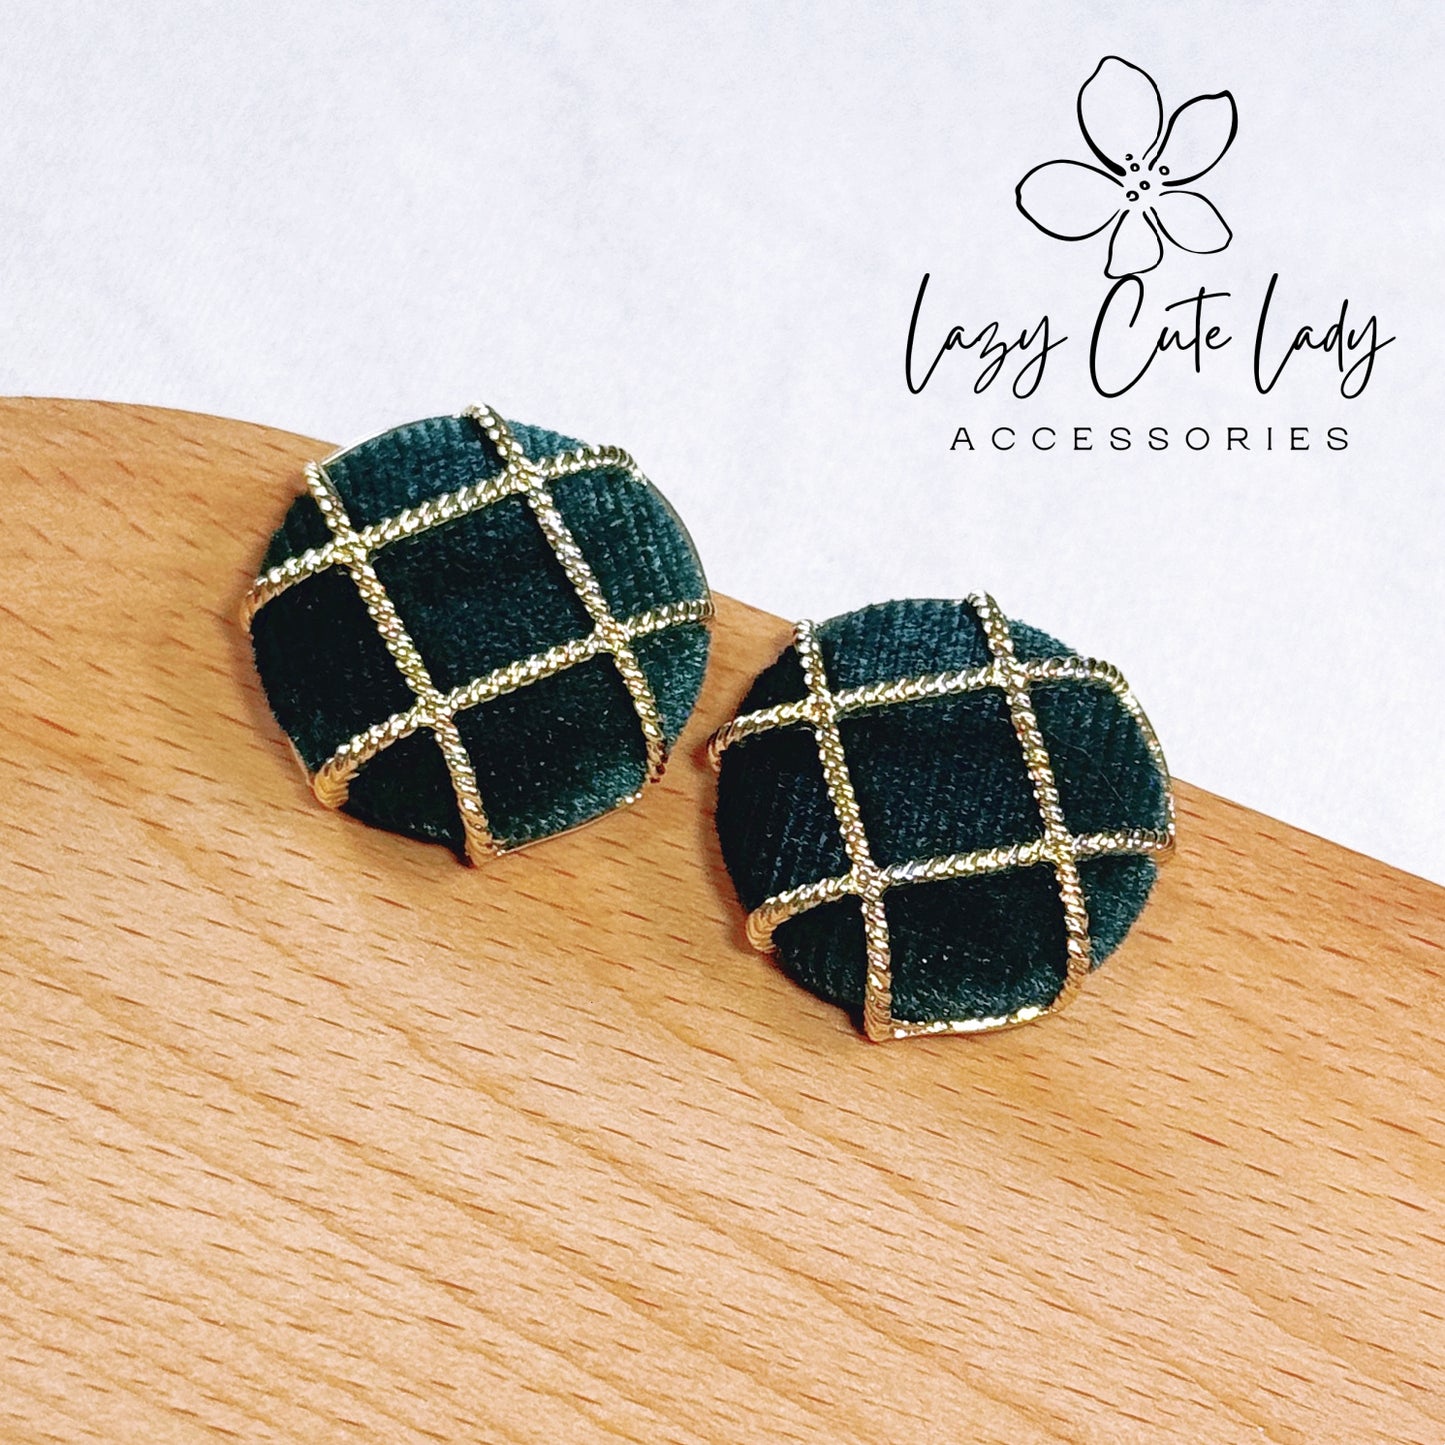 Exquisite Green Velvet Round Stud Earrings with Gold Mesh Detail